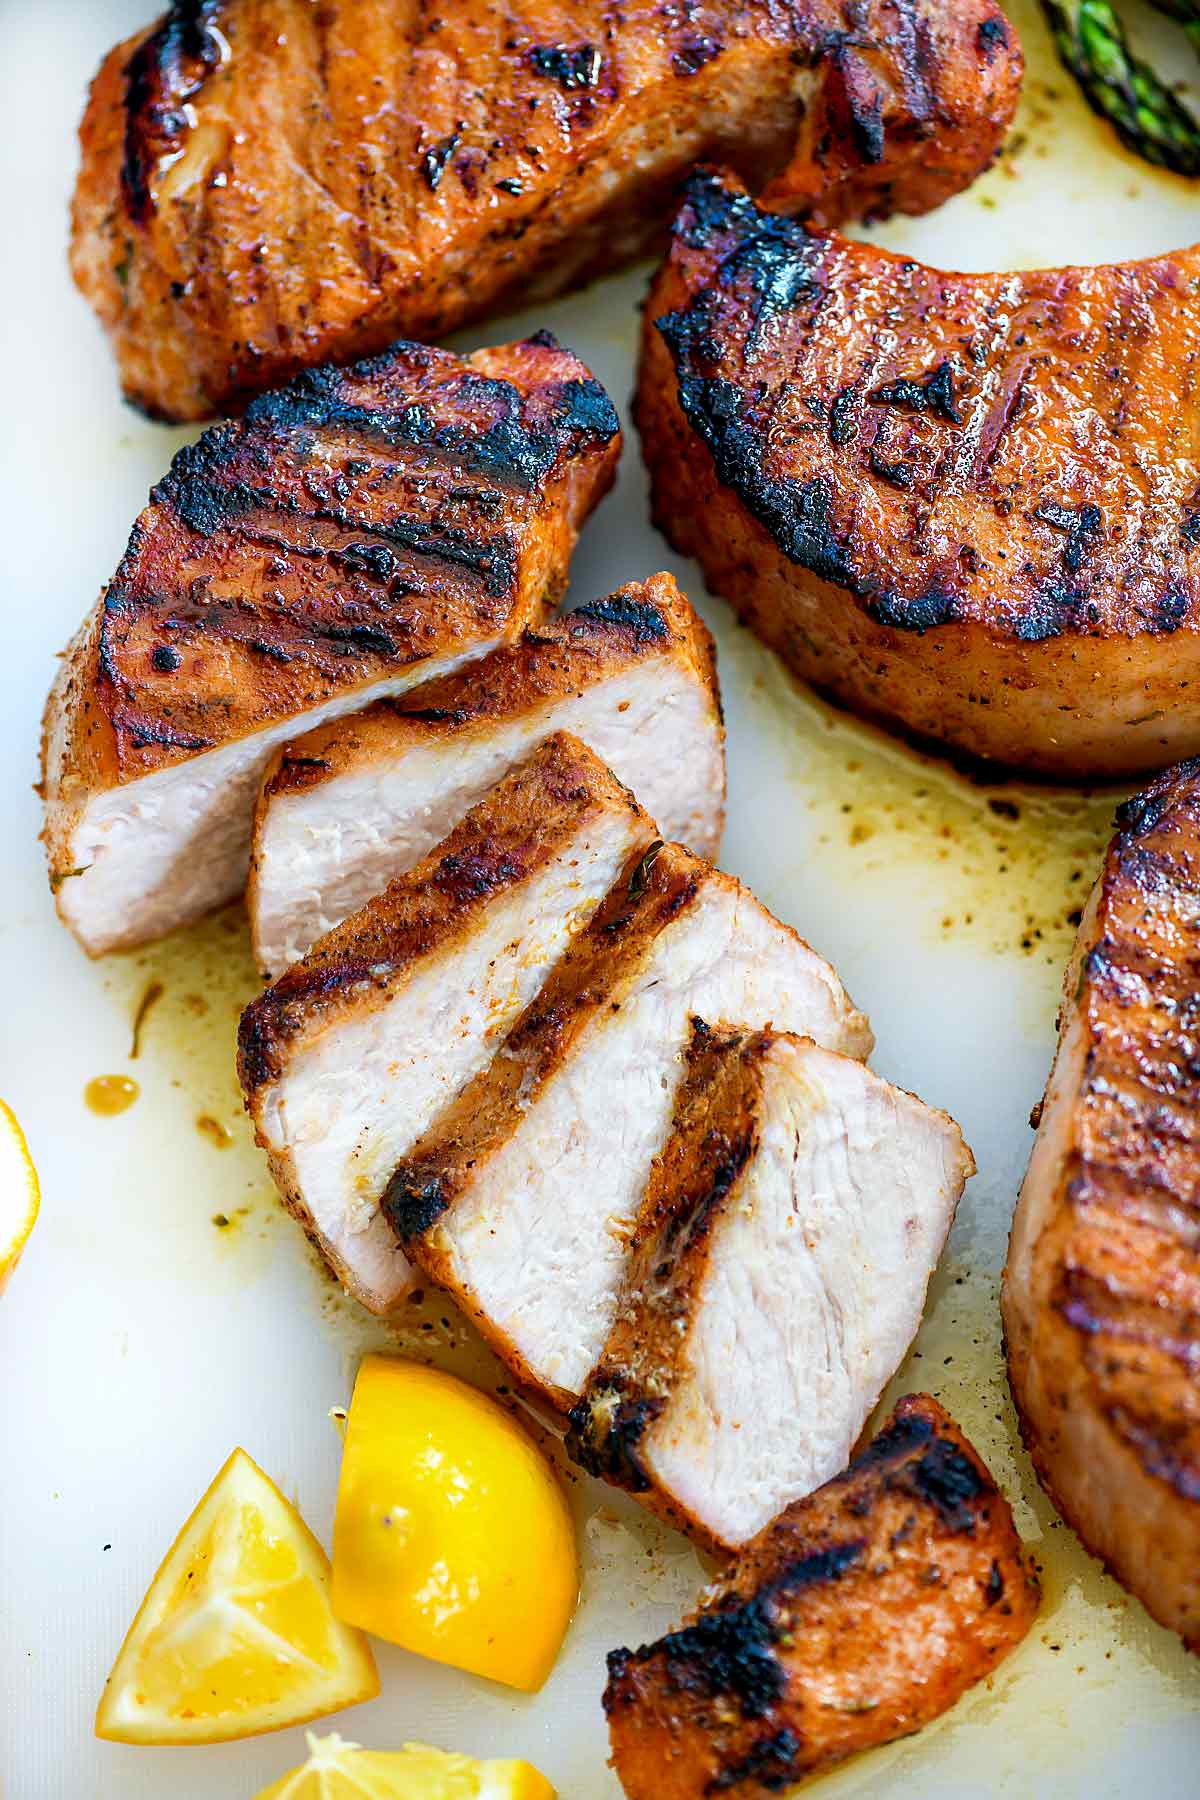 The Best Juicy Grilled Pork Chops Foodiecrush Com,Mexican Cornbread Recipe With Jiffy Mix